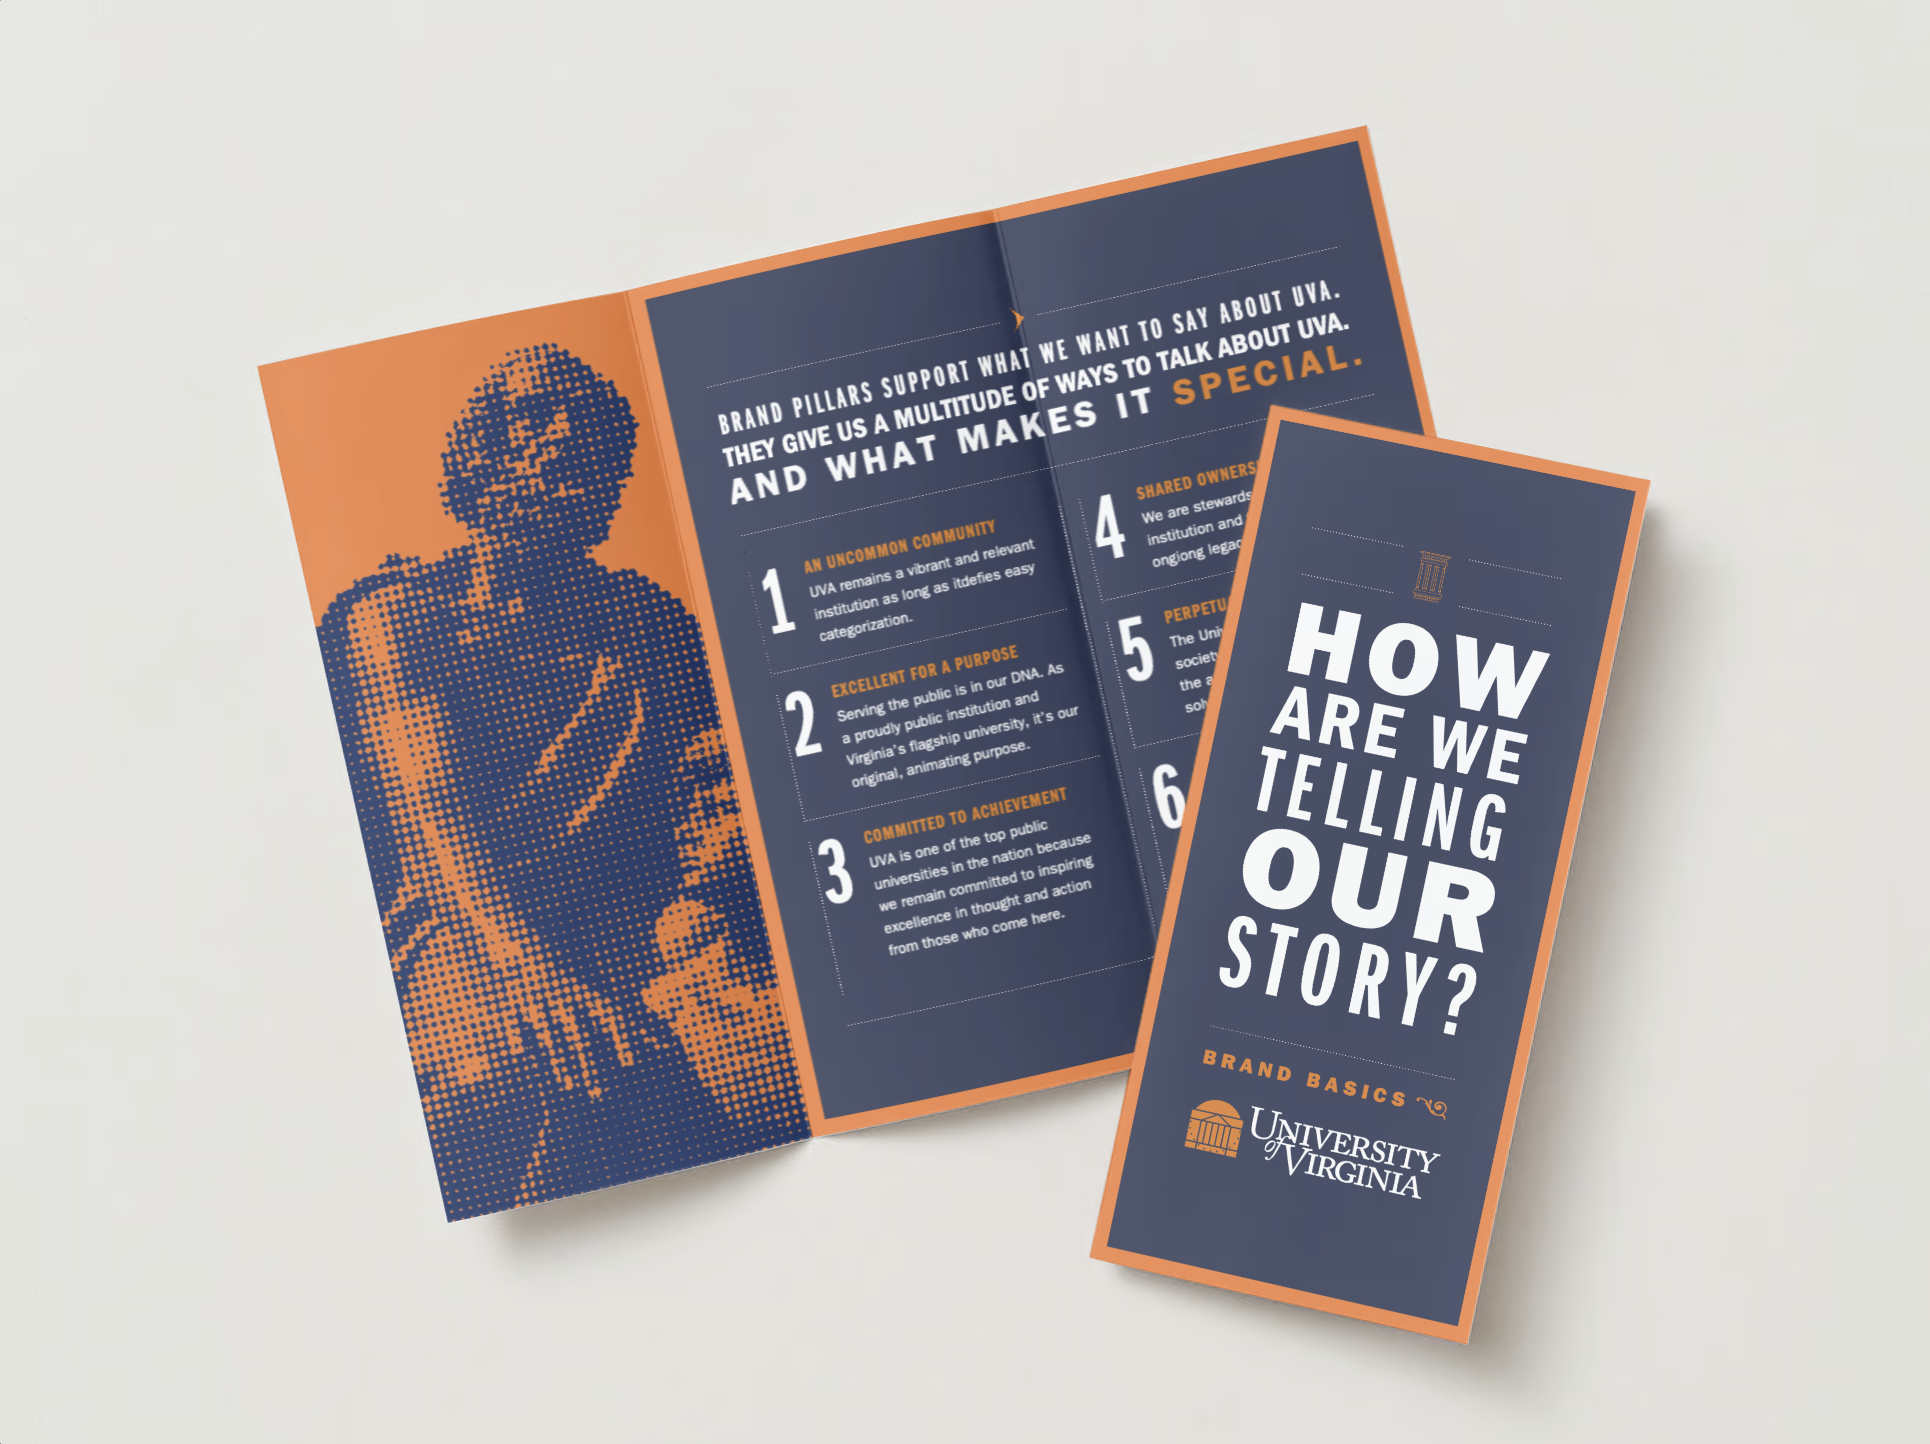 Mockup of a dark blue brochure with a pretreated image of the socrates statute on front